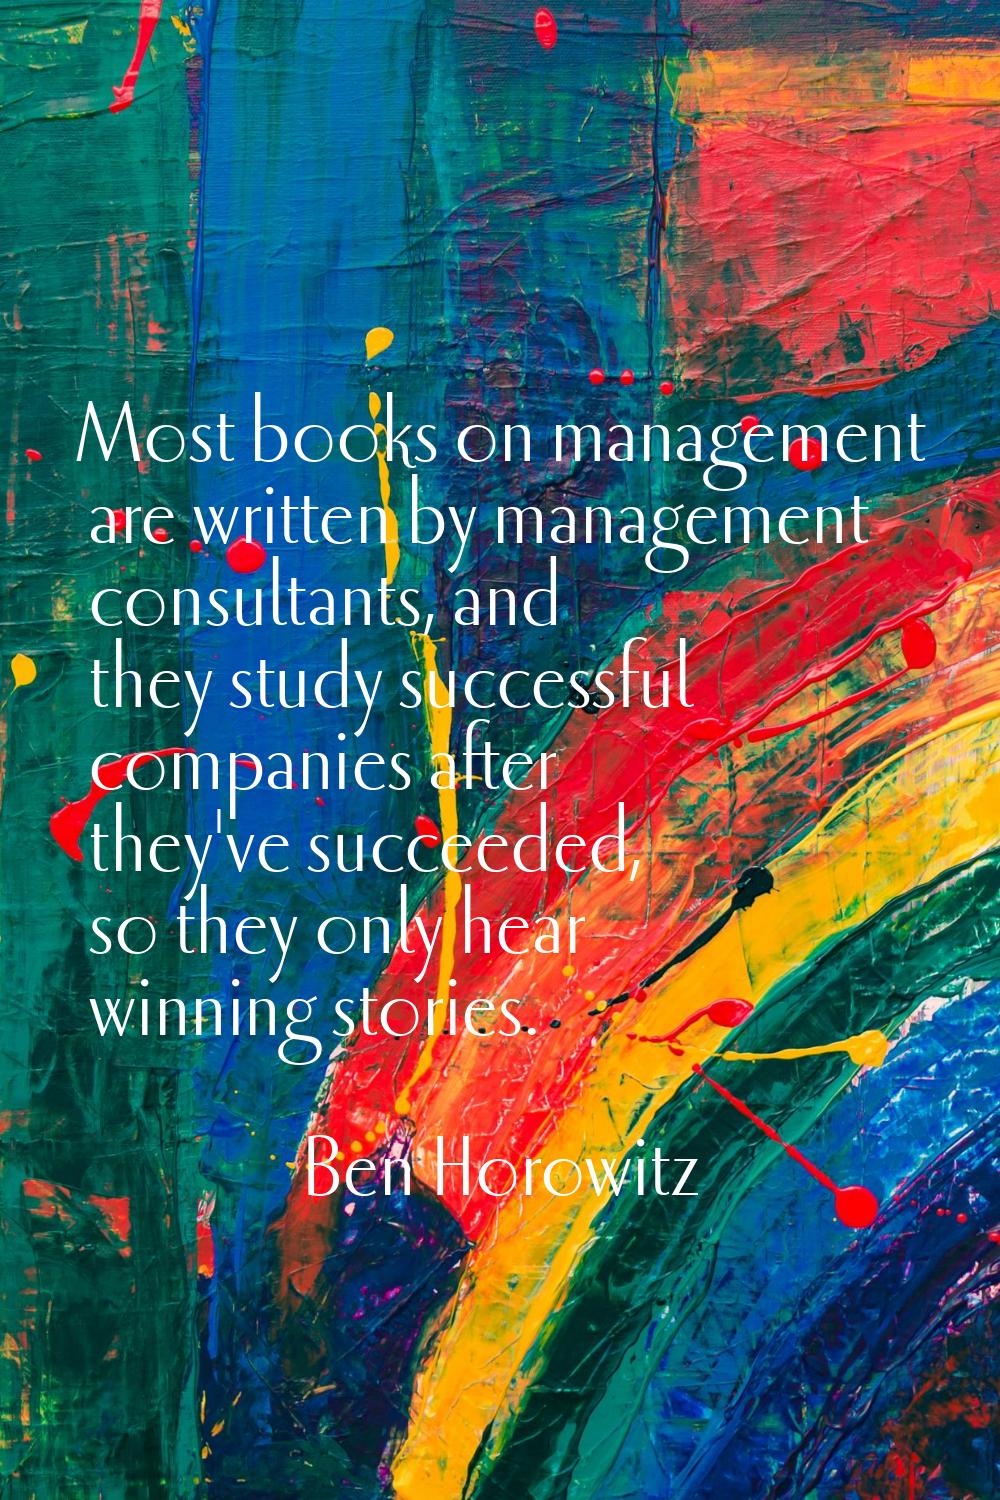 Most books on management are written by management consultants, and they study successful companies